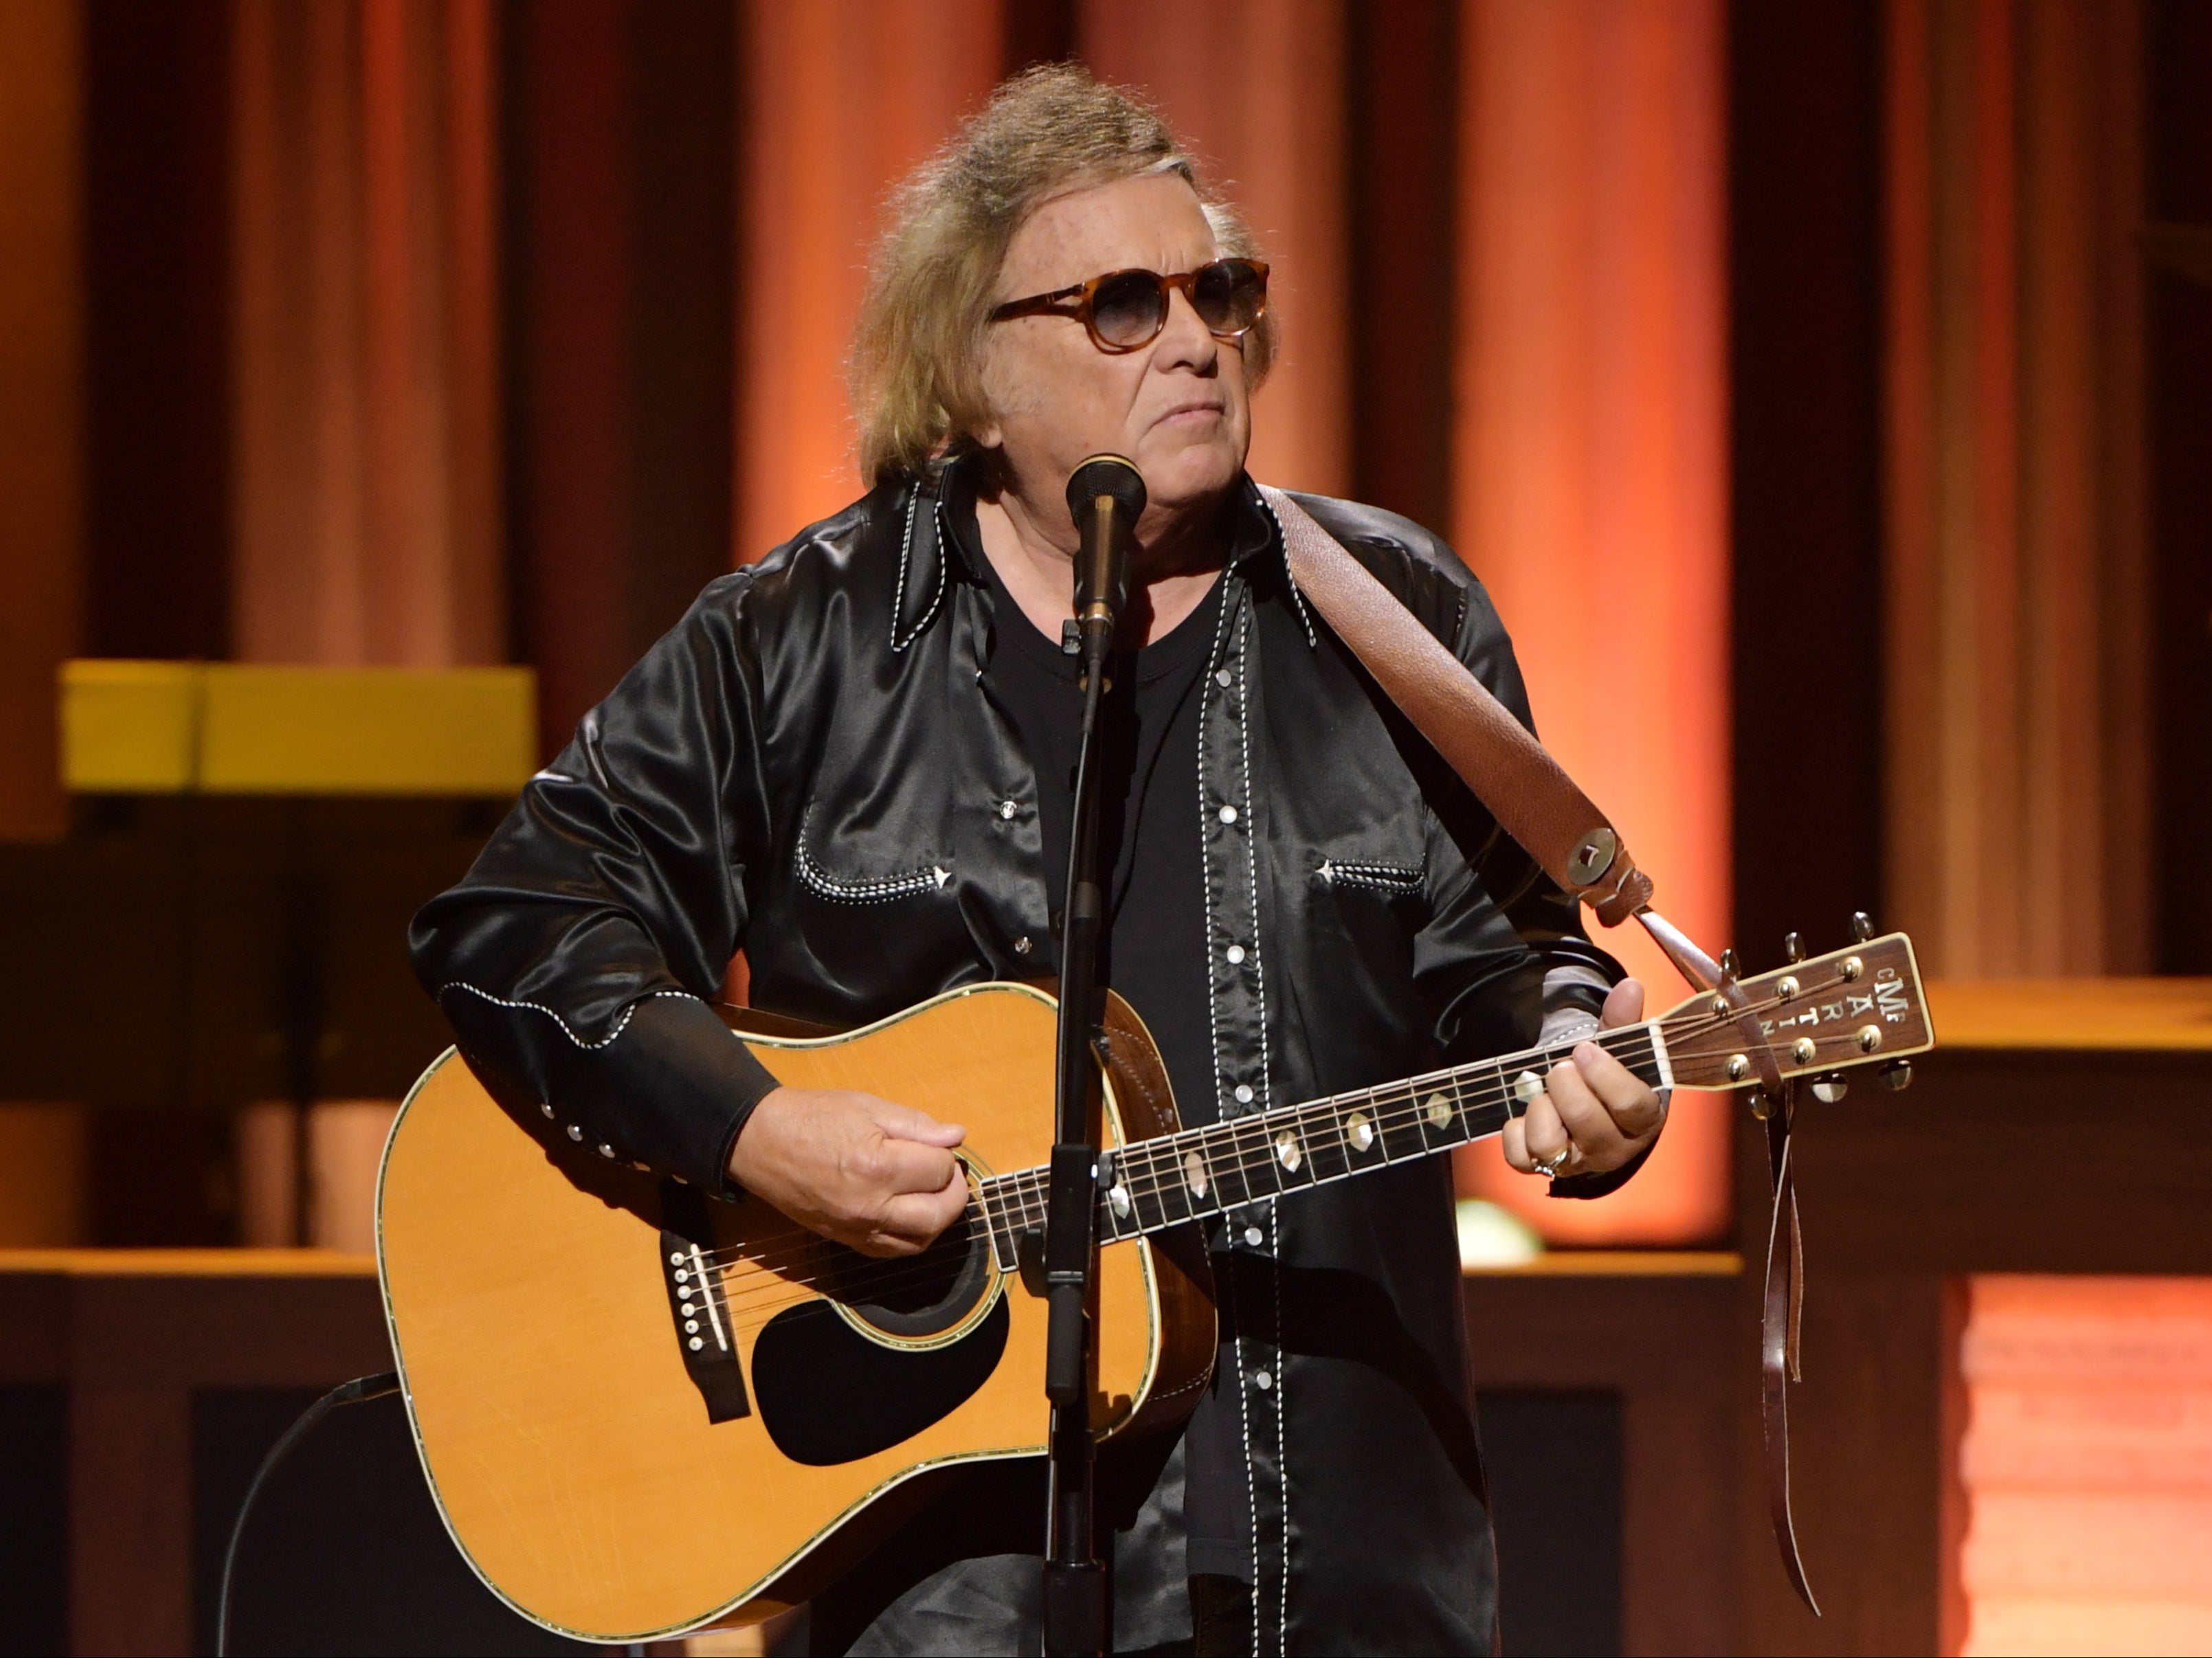 Don McLean performs at the Grand Ole Opry in Nashville, Tennessee, on 5 February 2020